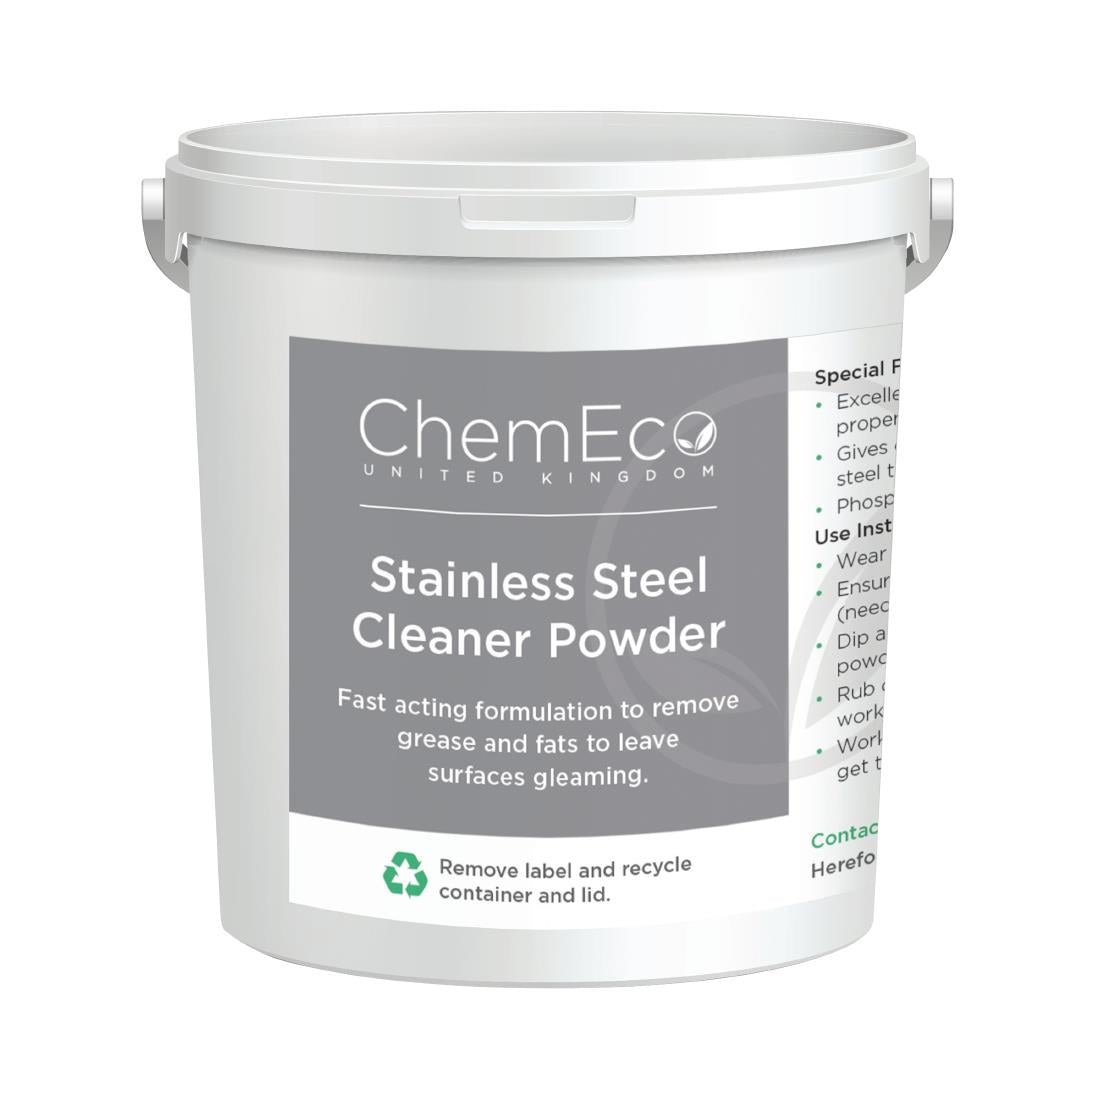 CX946 ChemEco Stainless Steel Cleaner Powder 1kg JD Catering Equipment Solutions Ltd